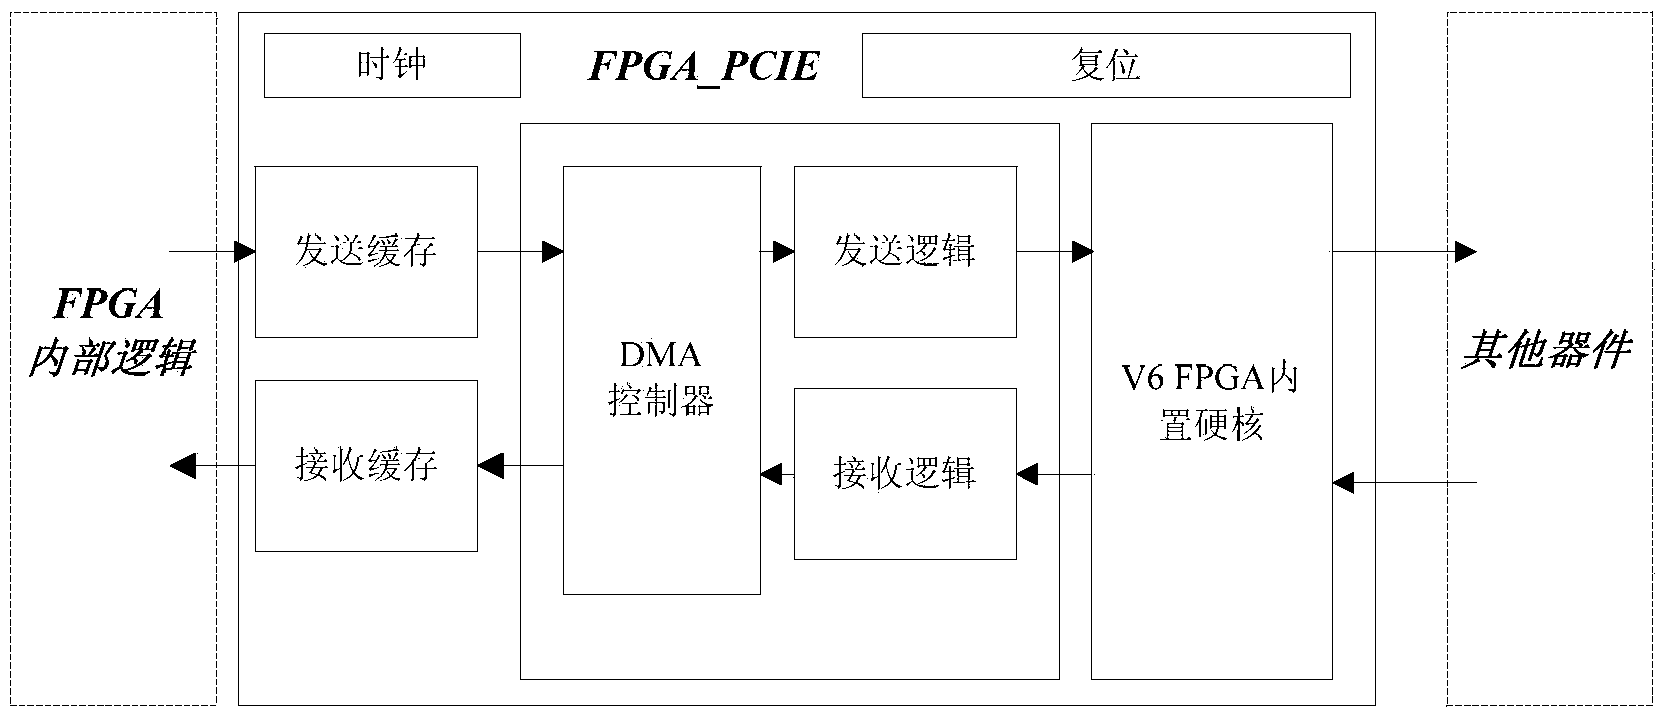 Multi-DSP and multi-FPGA parallel processing system and implement method